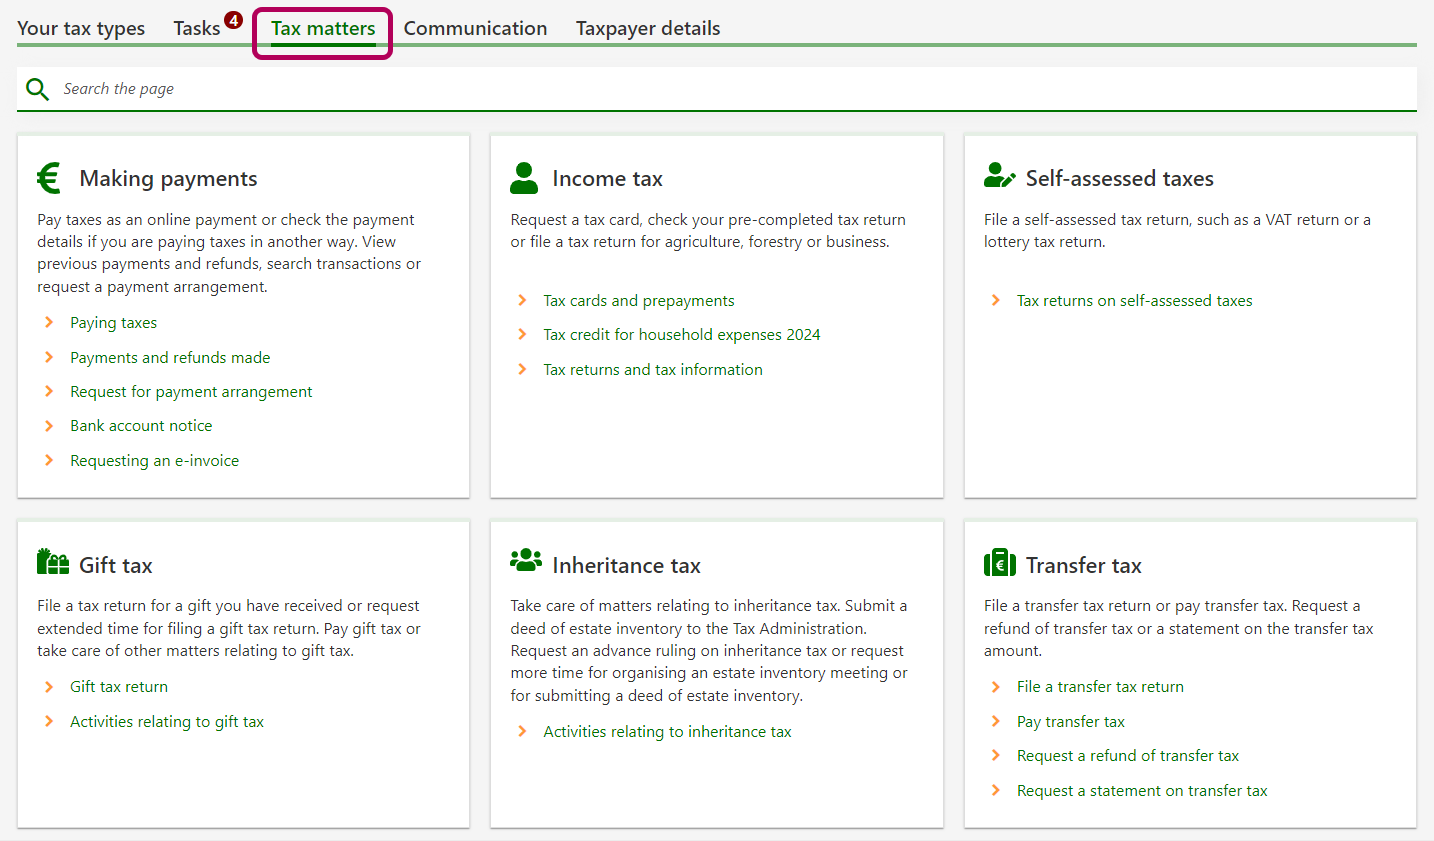 You can take care of a variety of tax matters in MyTax under the Tax matters tab.